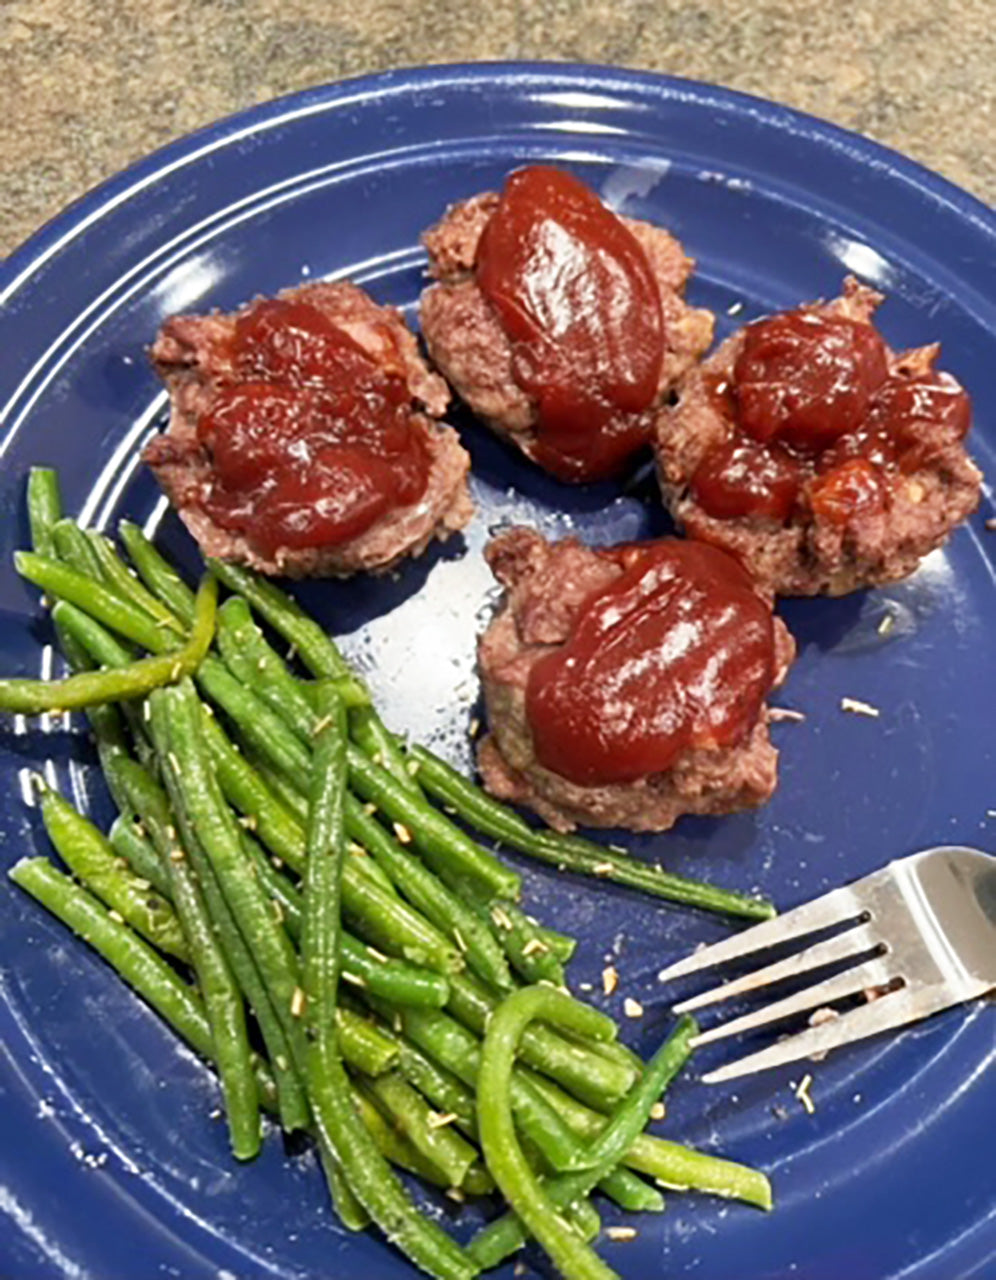 Amy's Awesome Meatloaf with Green Beans